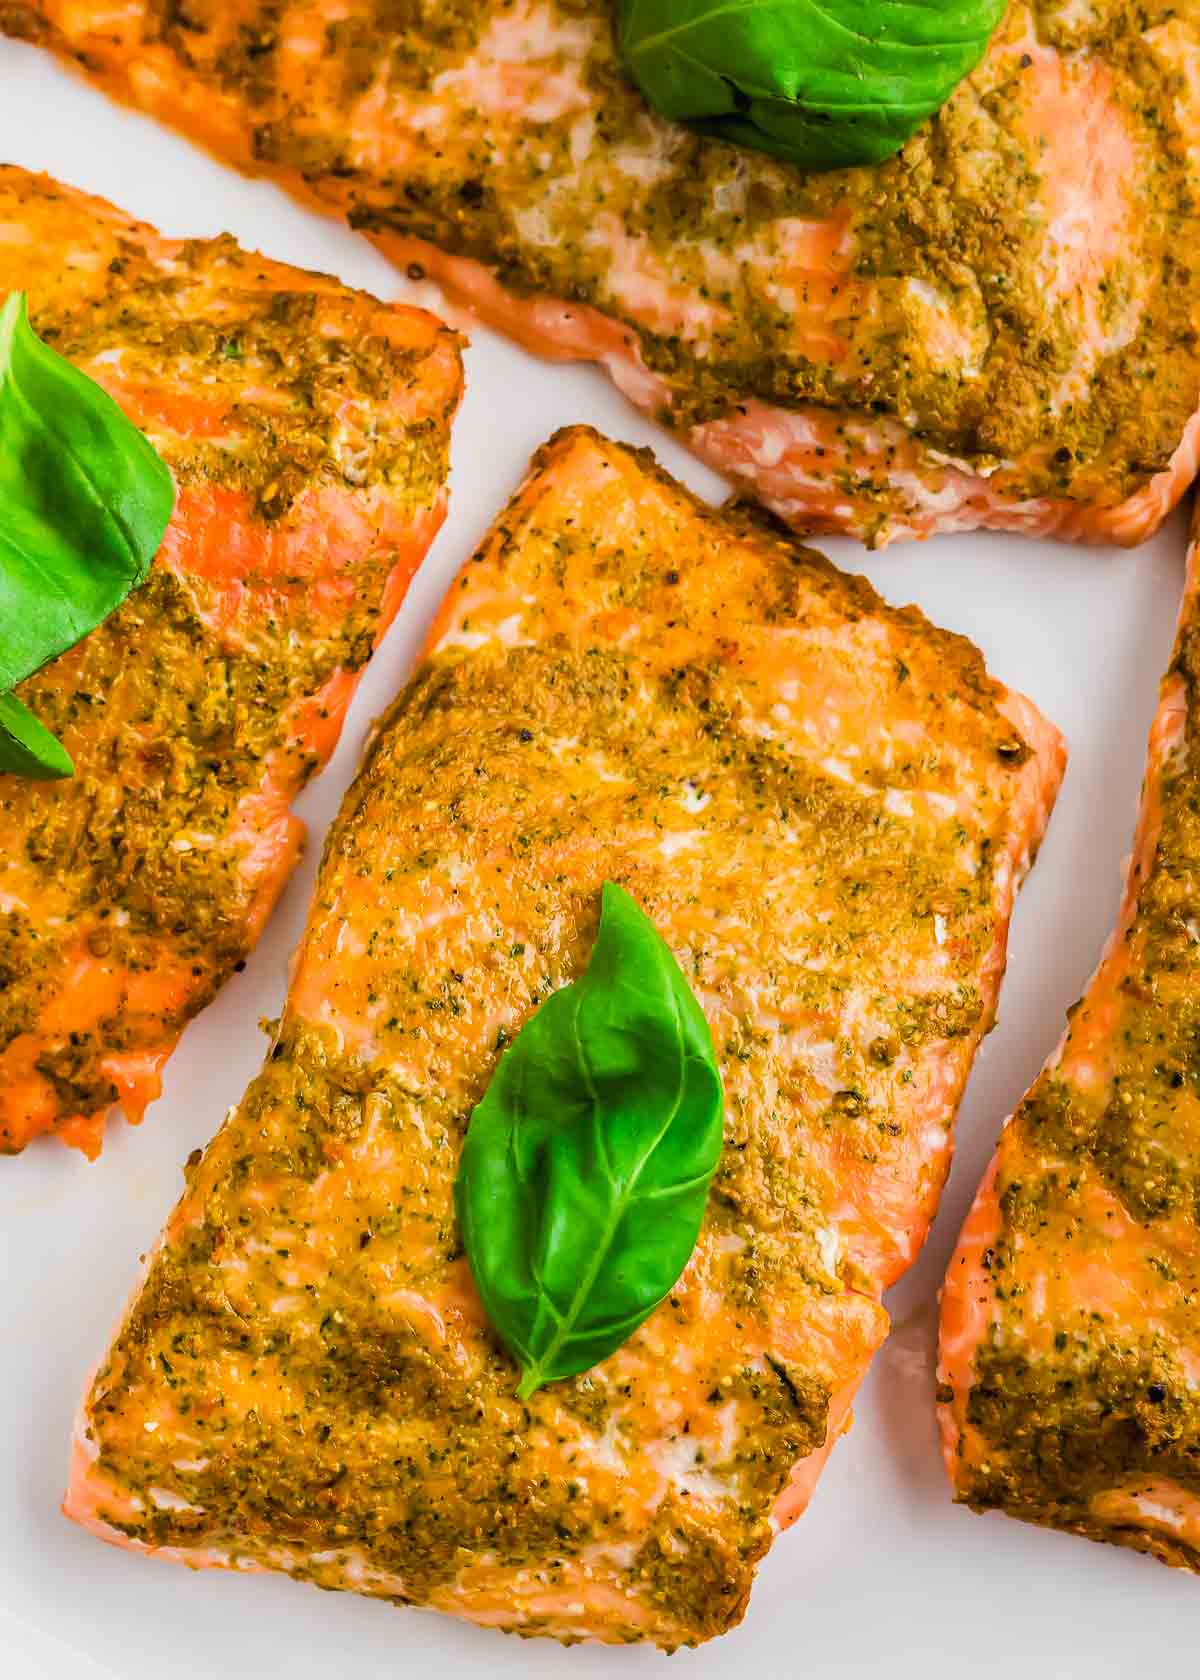 Pesto salmon filets garnished with basil on a white plate.